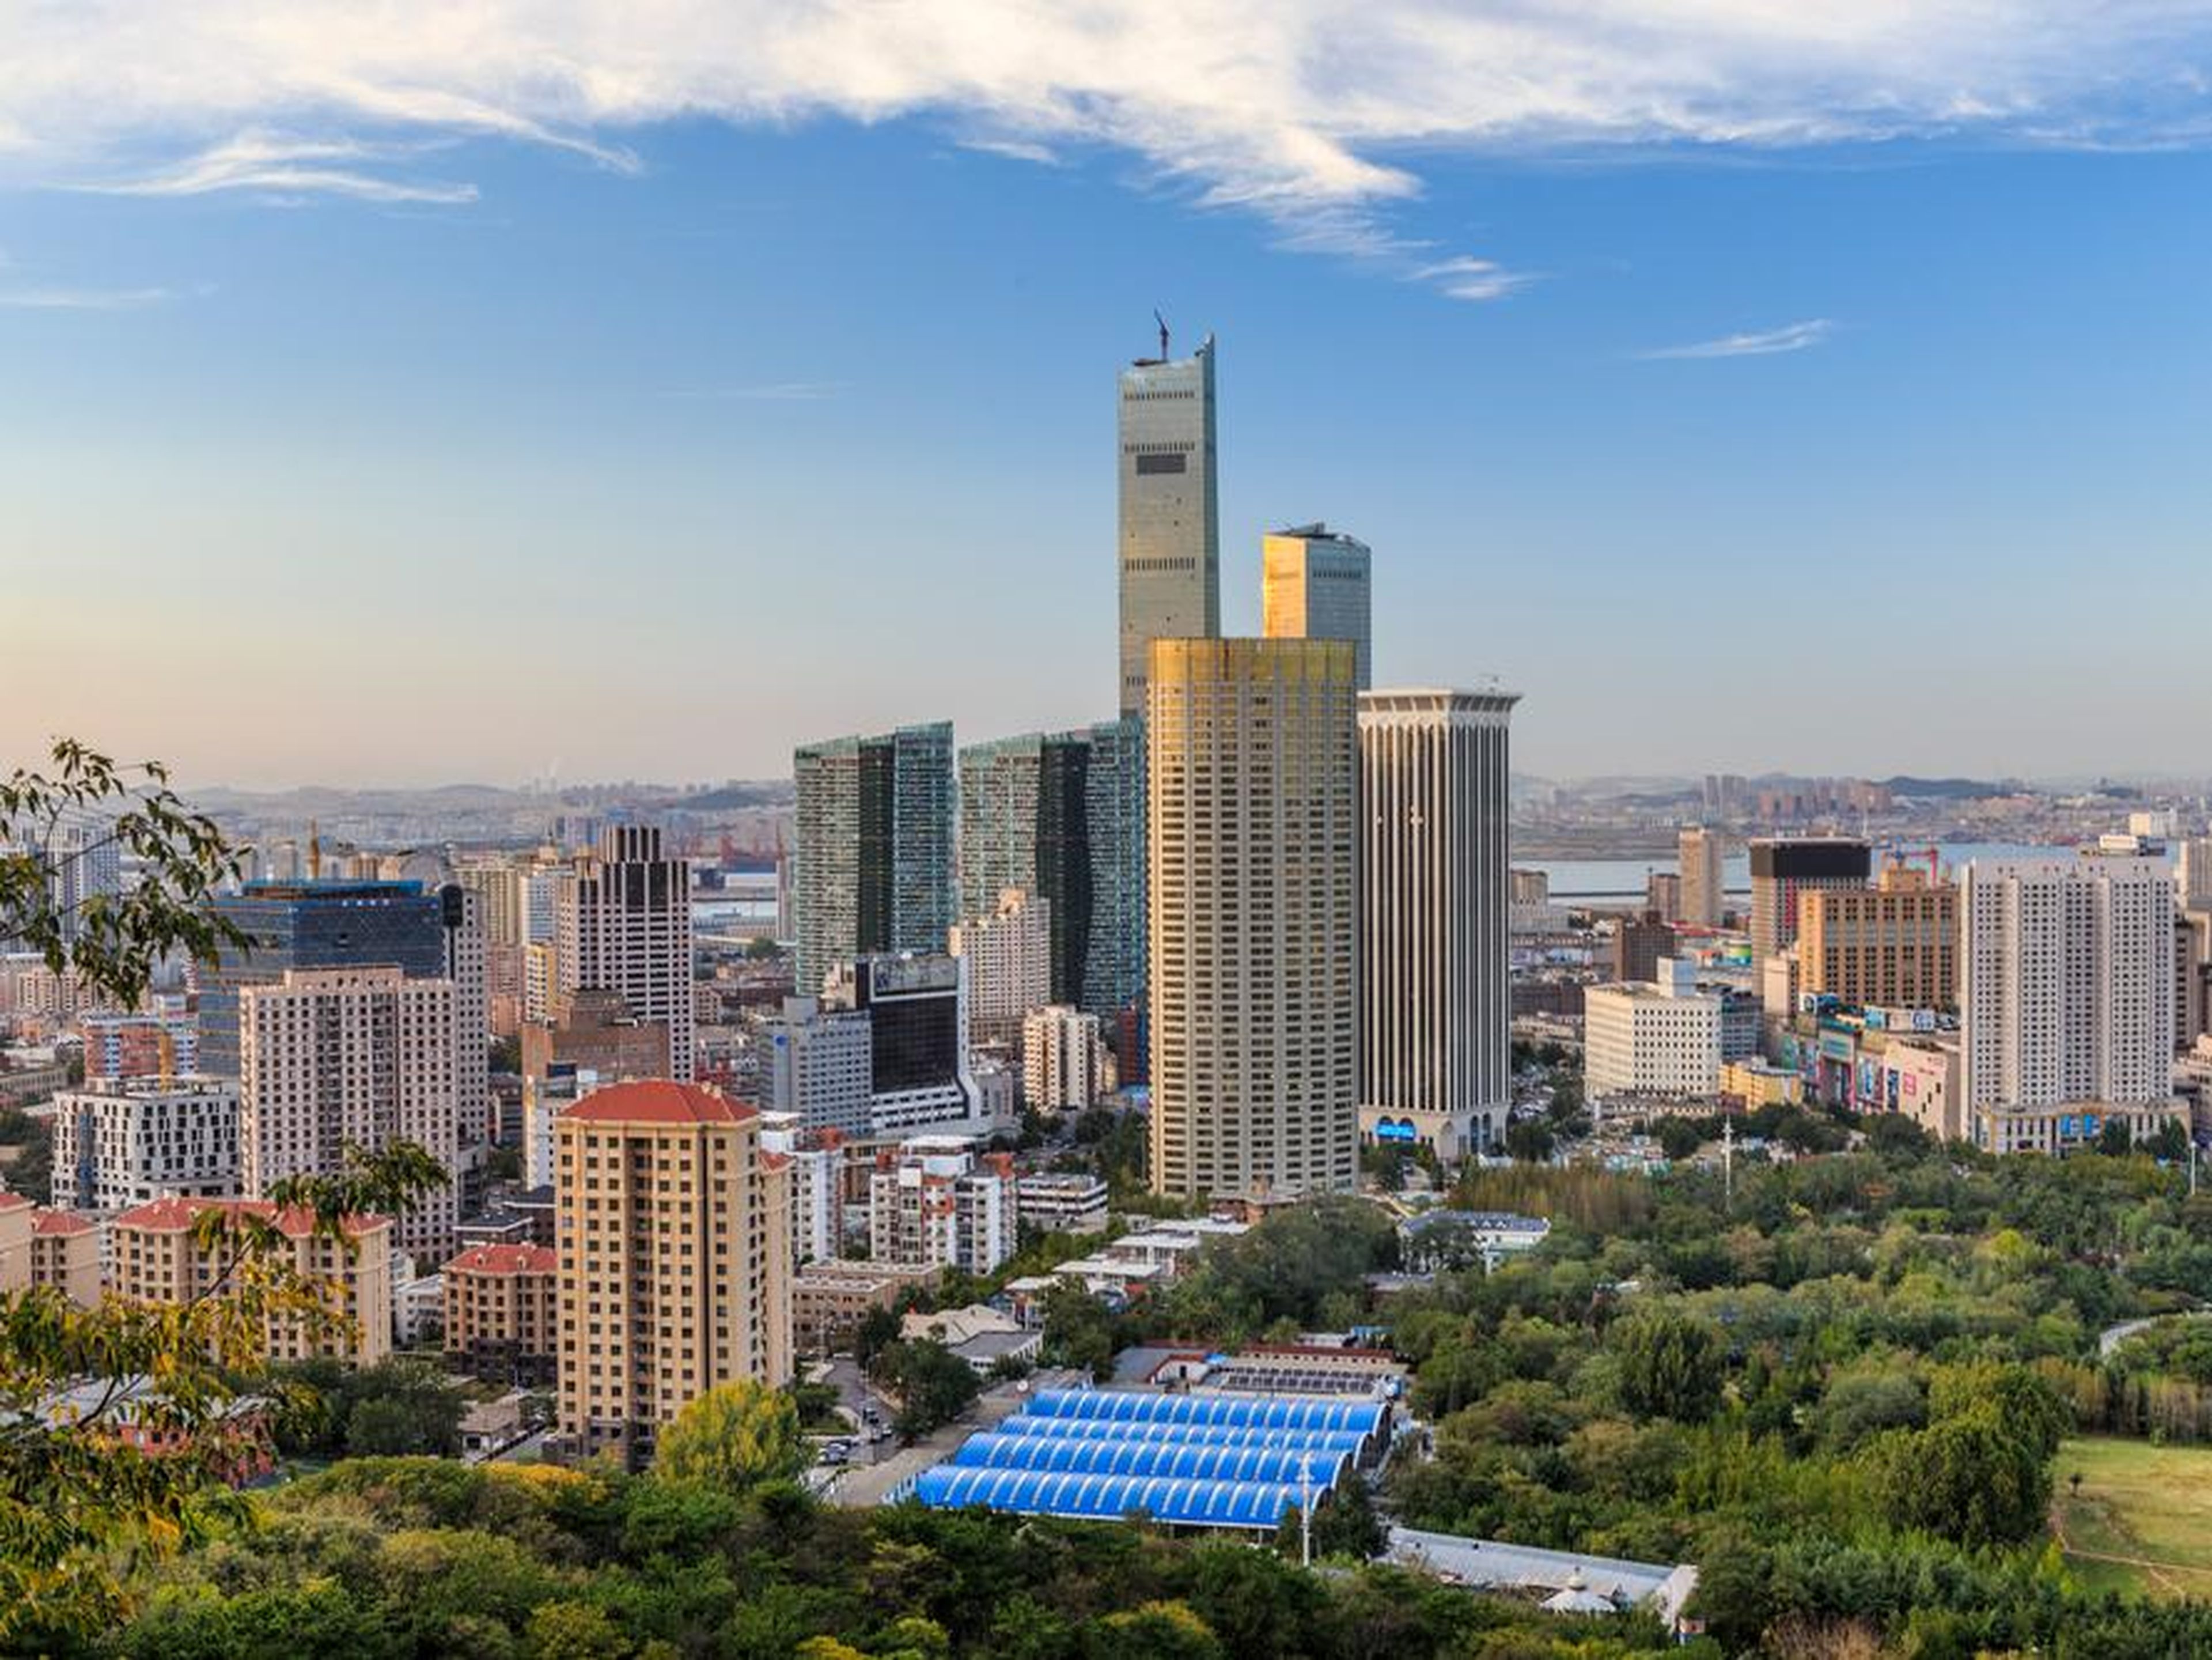 Lonely Planet calls Dalian, China, "one of the most relaxed and liveable cities in the northeast, if not all of China" and highlights its "impressive coastline, complete with swimming beaches."